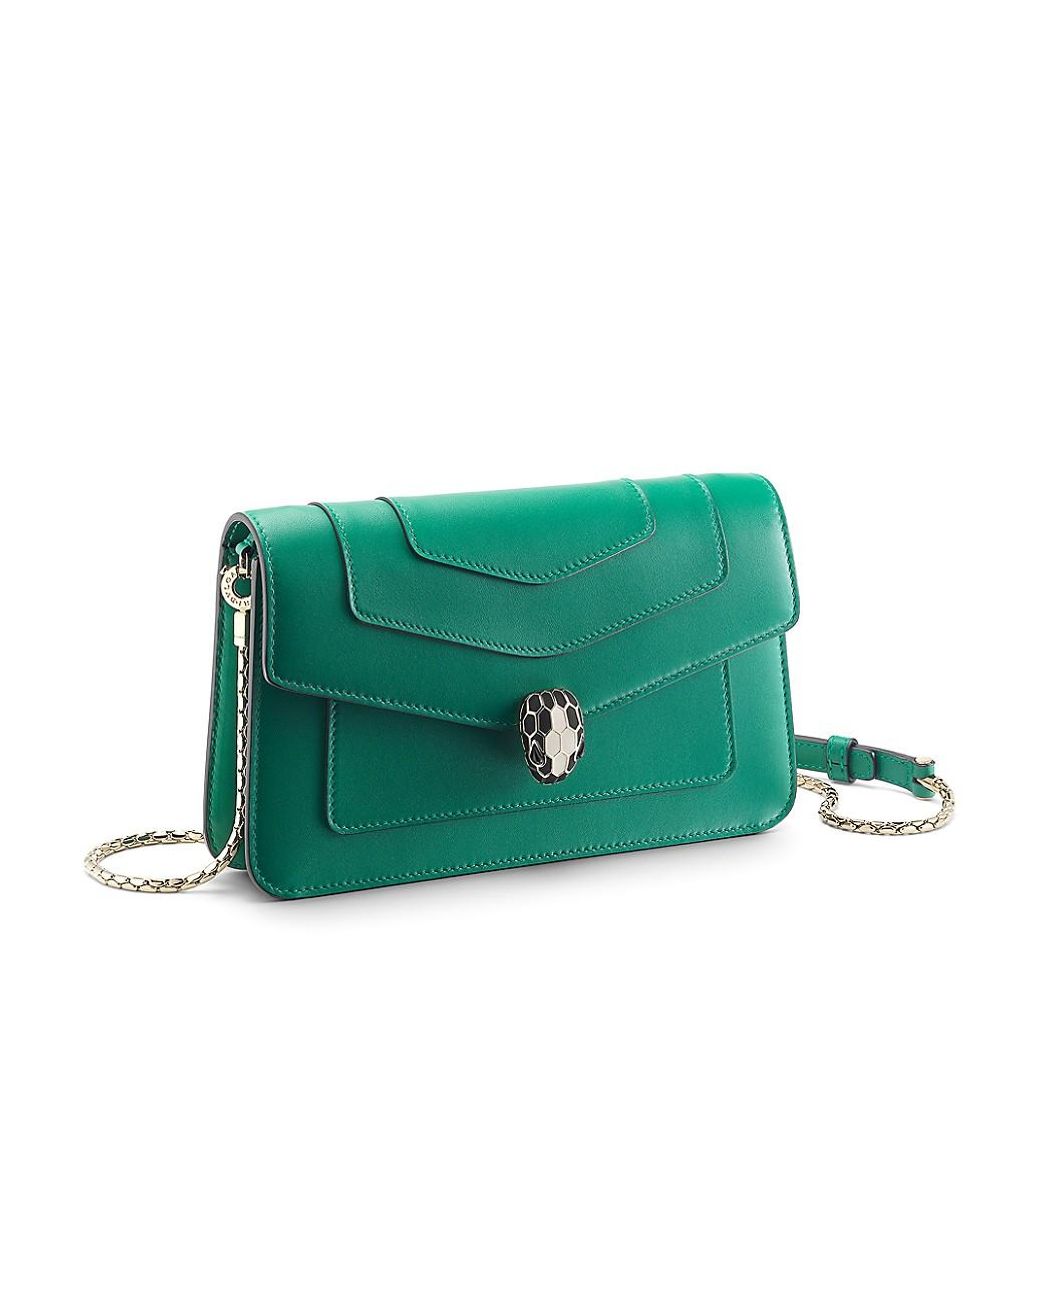 BVLGARI Serpenti Leather Wallet-on-chain in Green | Lyst